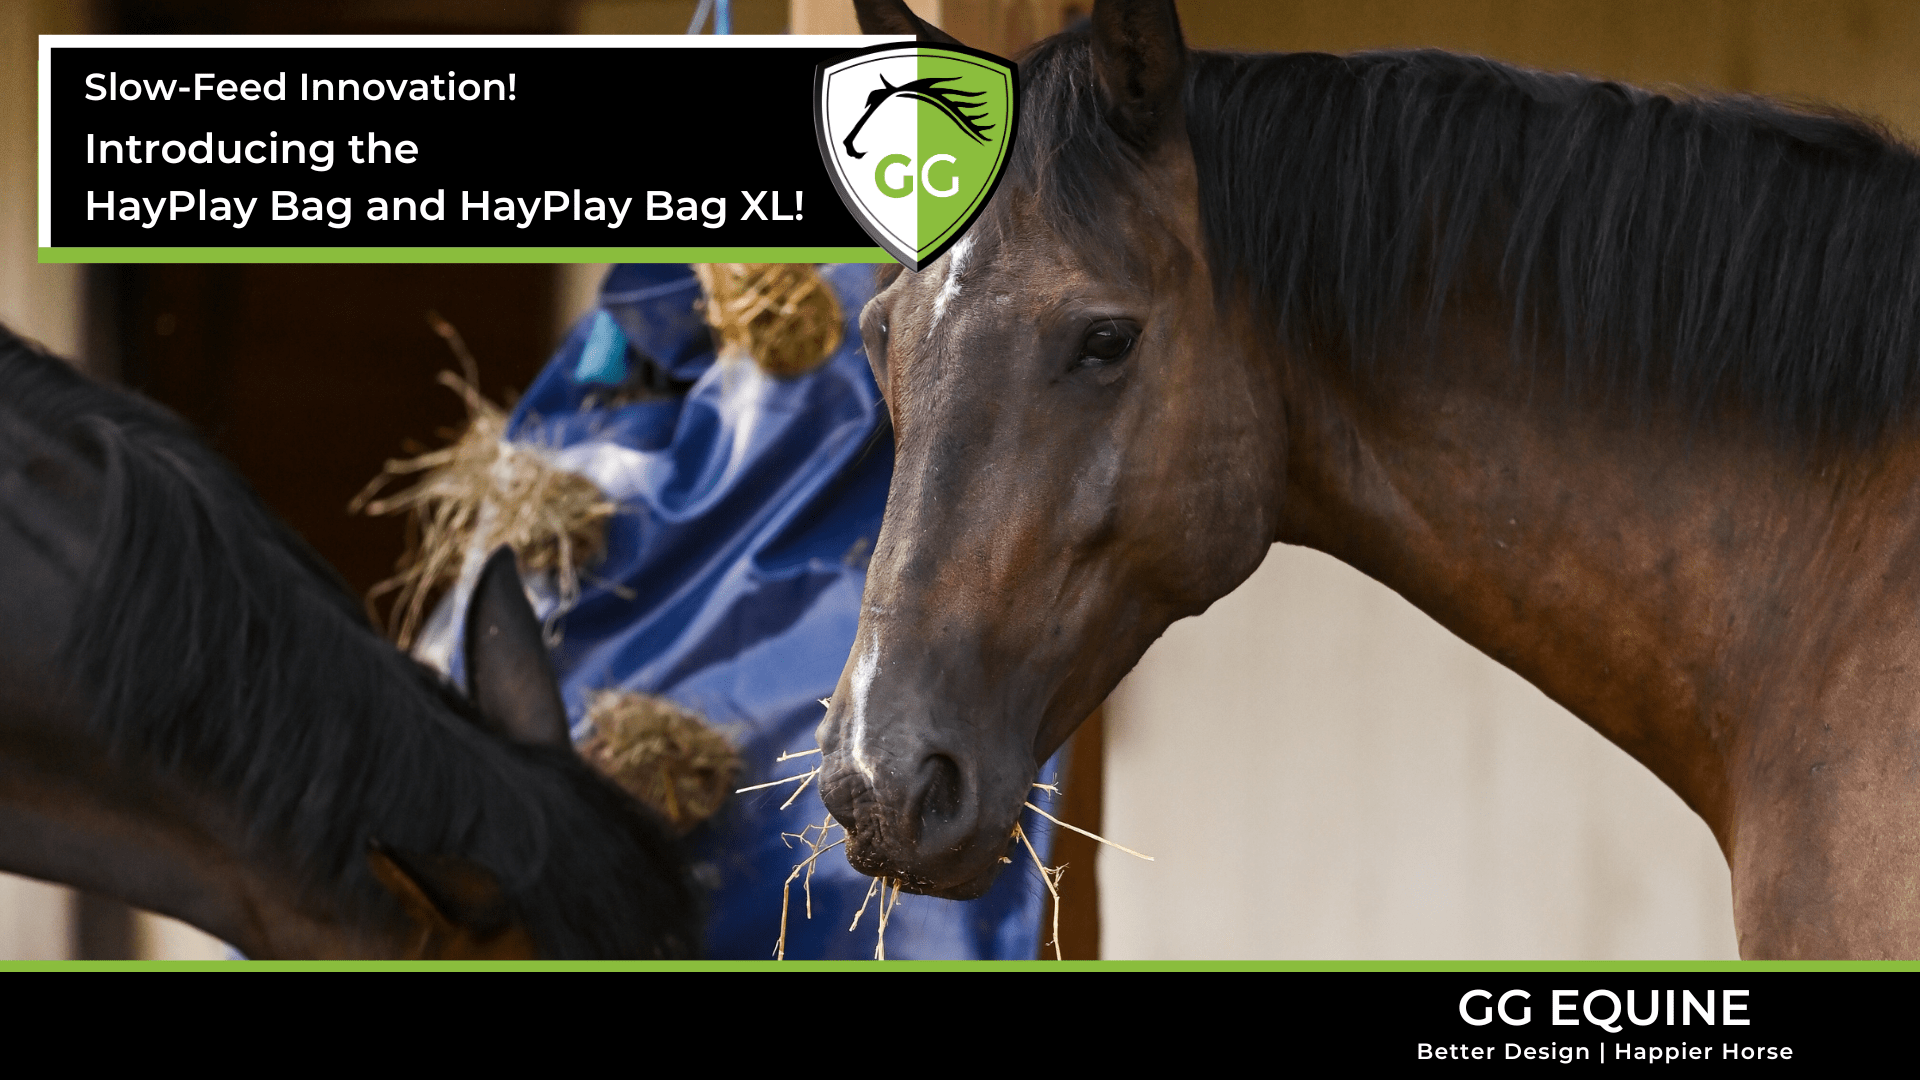 Load video: An introductory look at the features of the HayPlay Bag slow-feeder for horses.